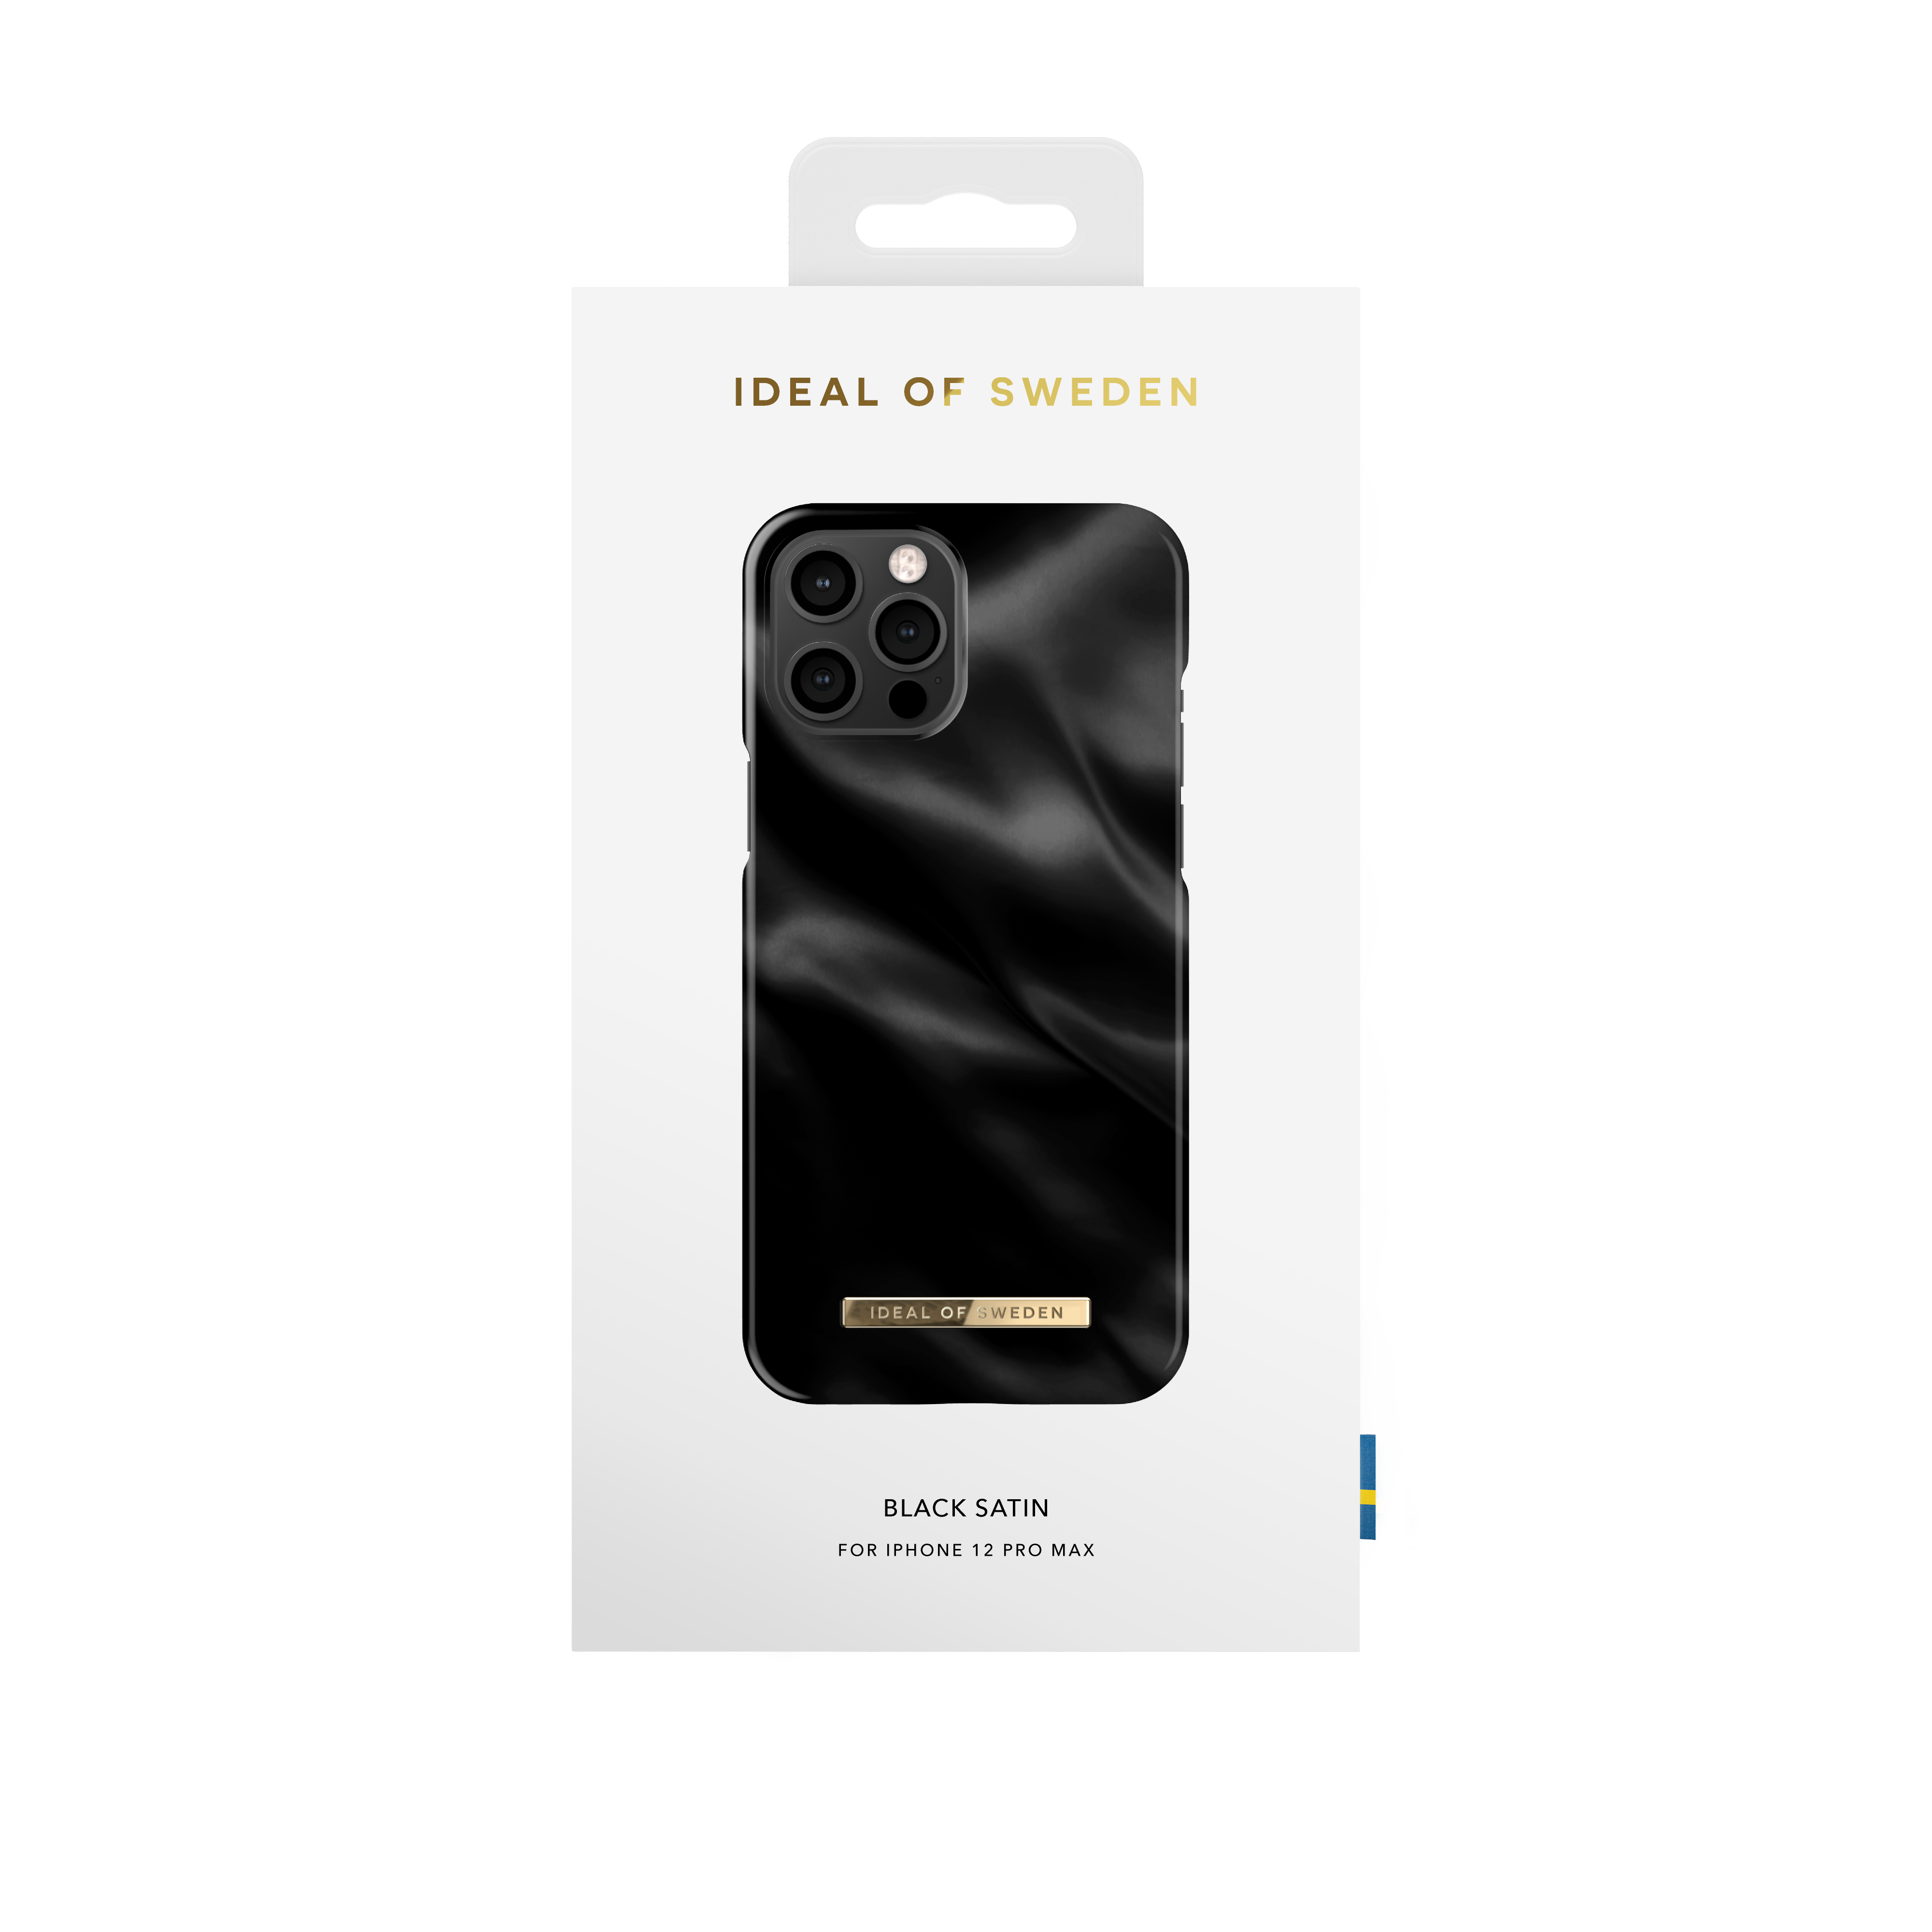 IDEAL OF SWEDEN 12 Satin Backcover, IPhone Pro IDFCSS21-I2067-312, Black Apple, Max